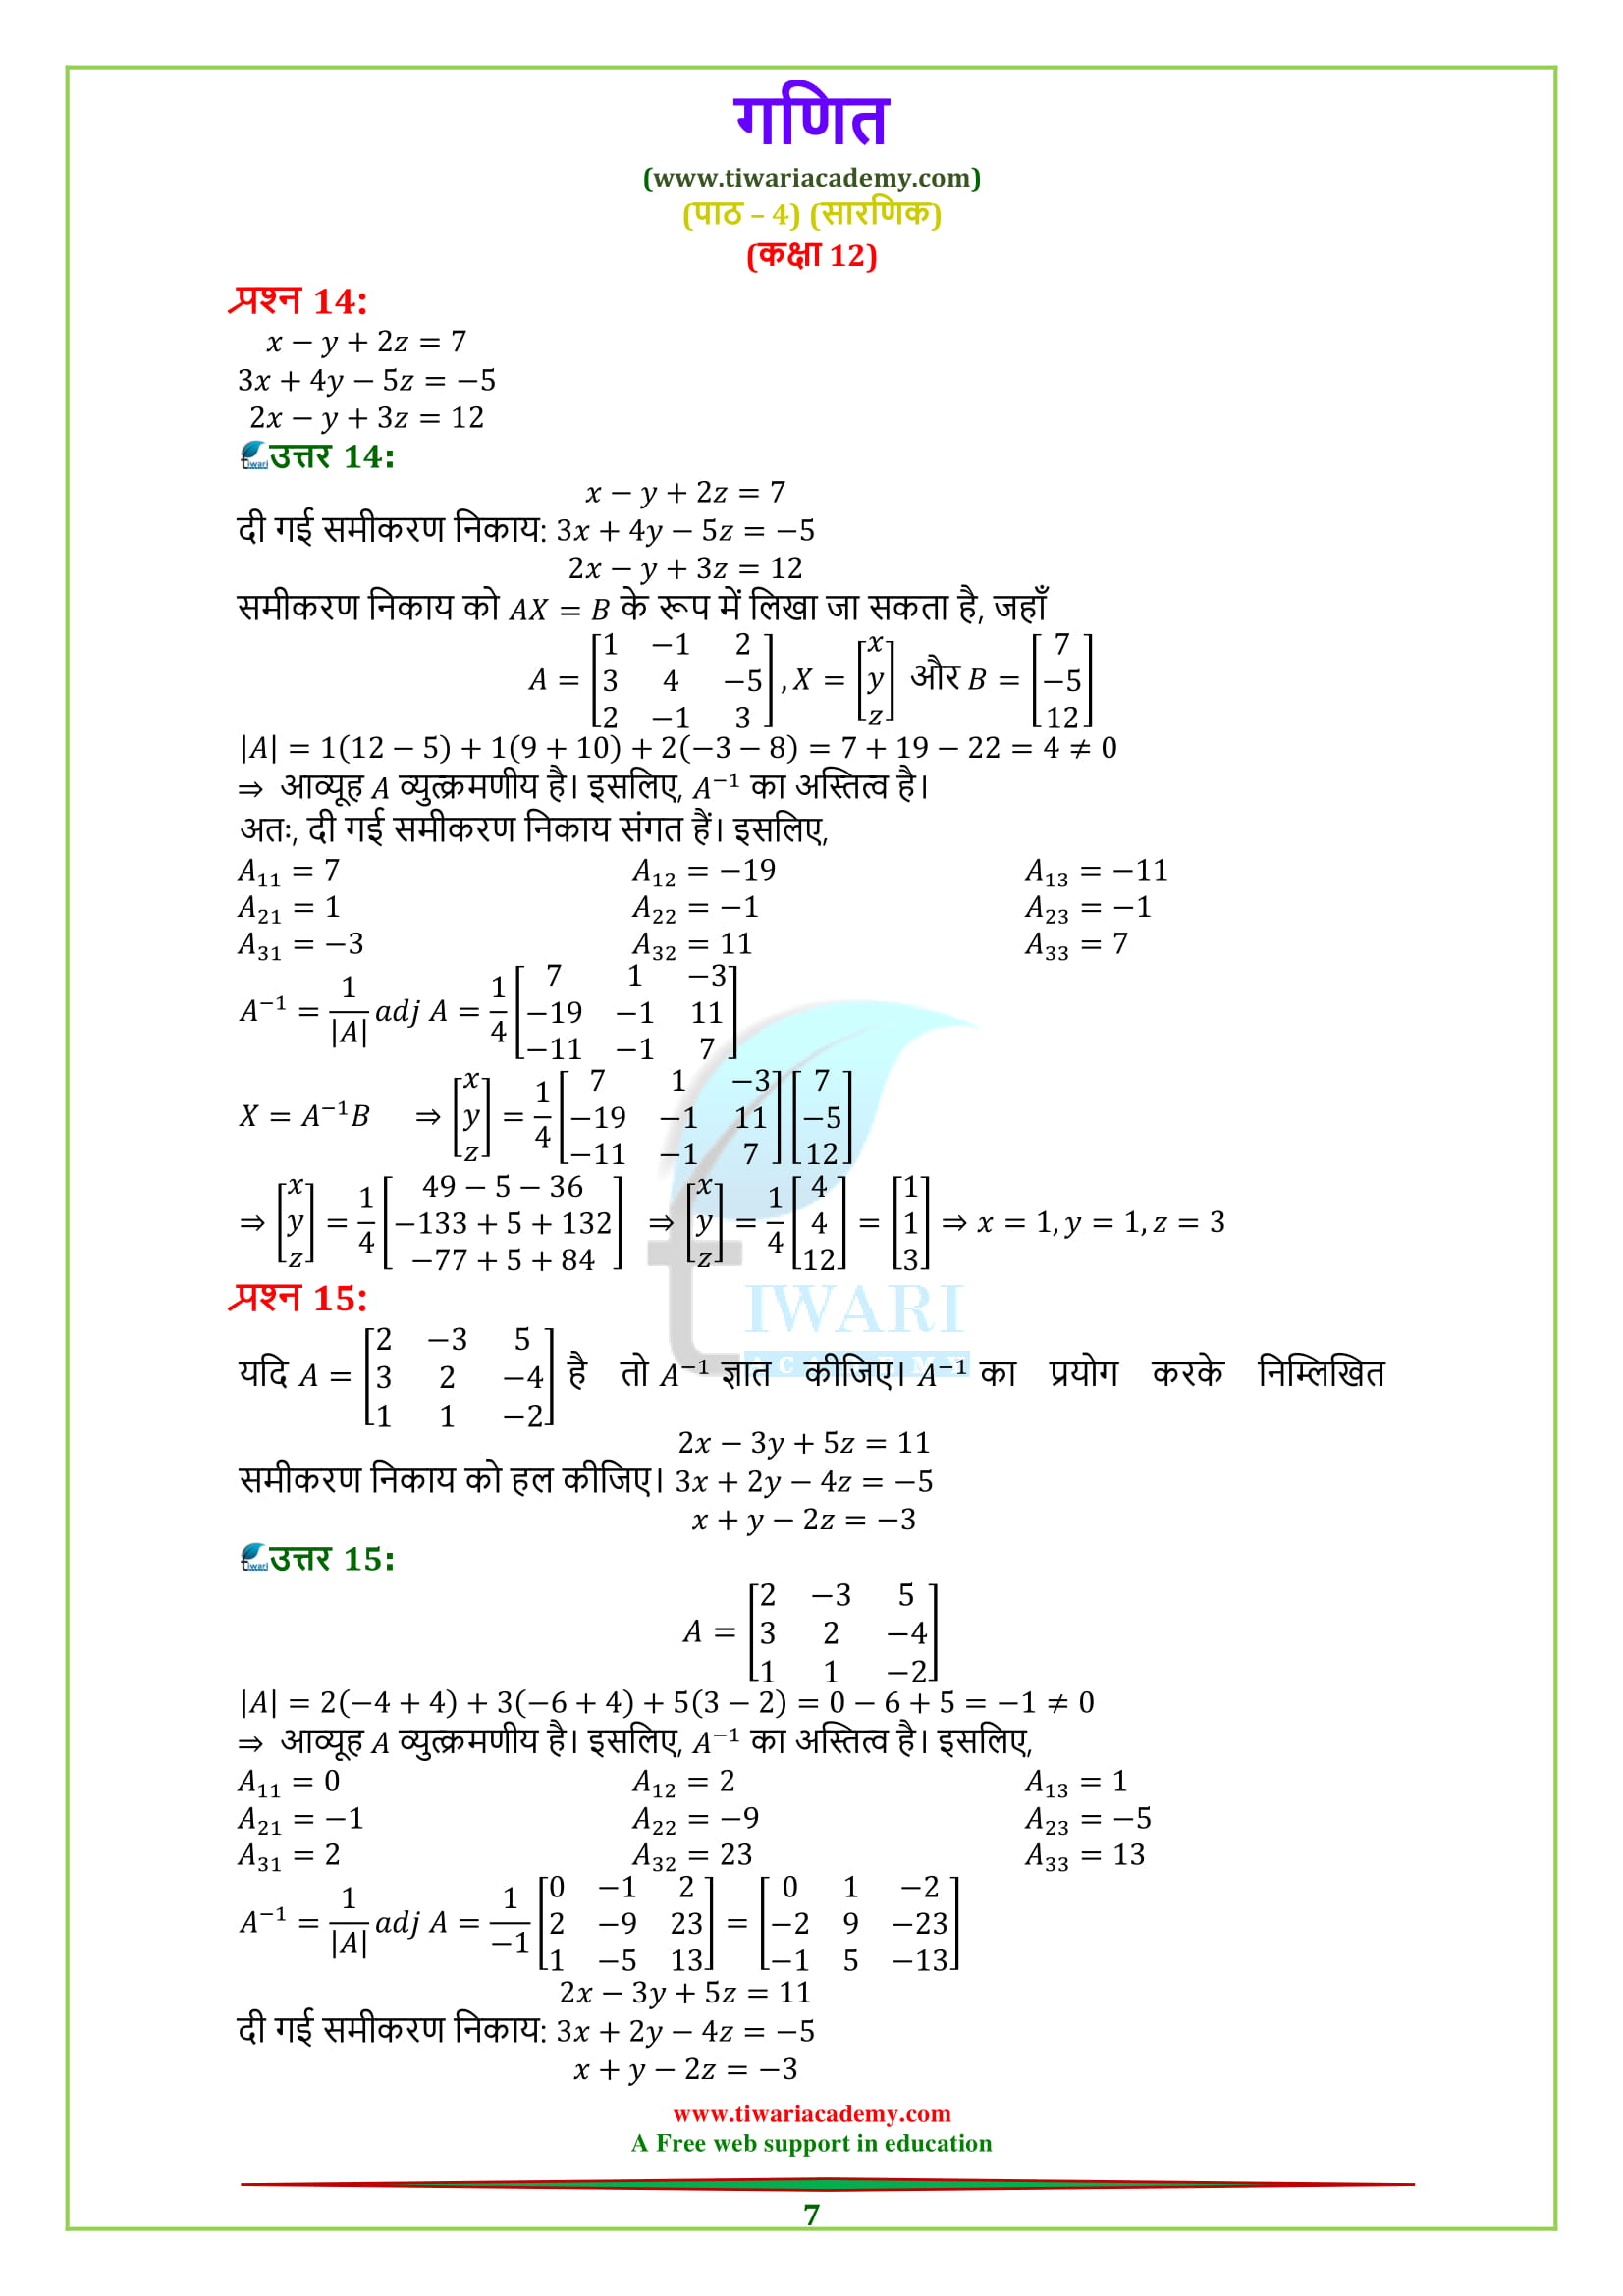 Class 12 Maths Chapter 4 Exercise 4.6 sols in Hindi medium for up board 2018-19